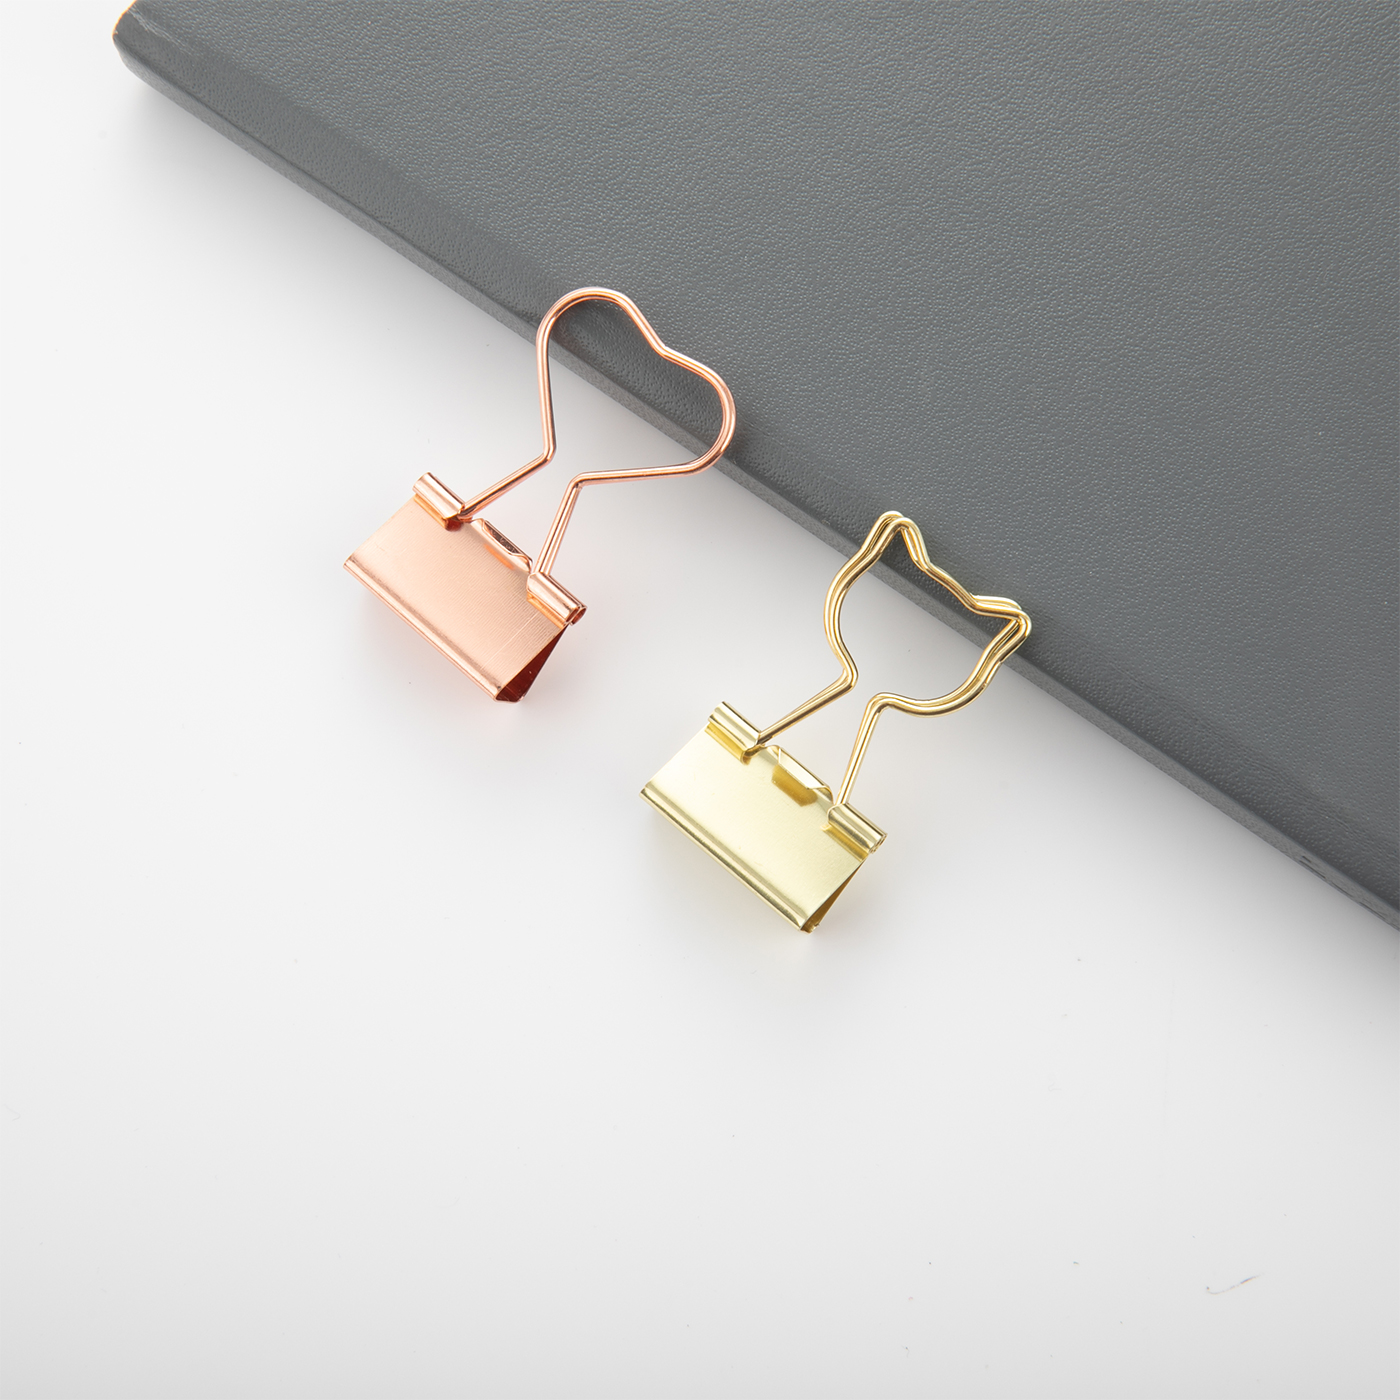 Customized Cute Gold Plated Metal Binder Clip2